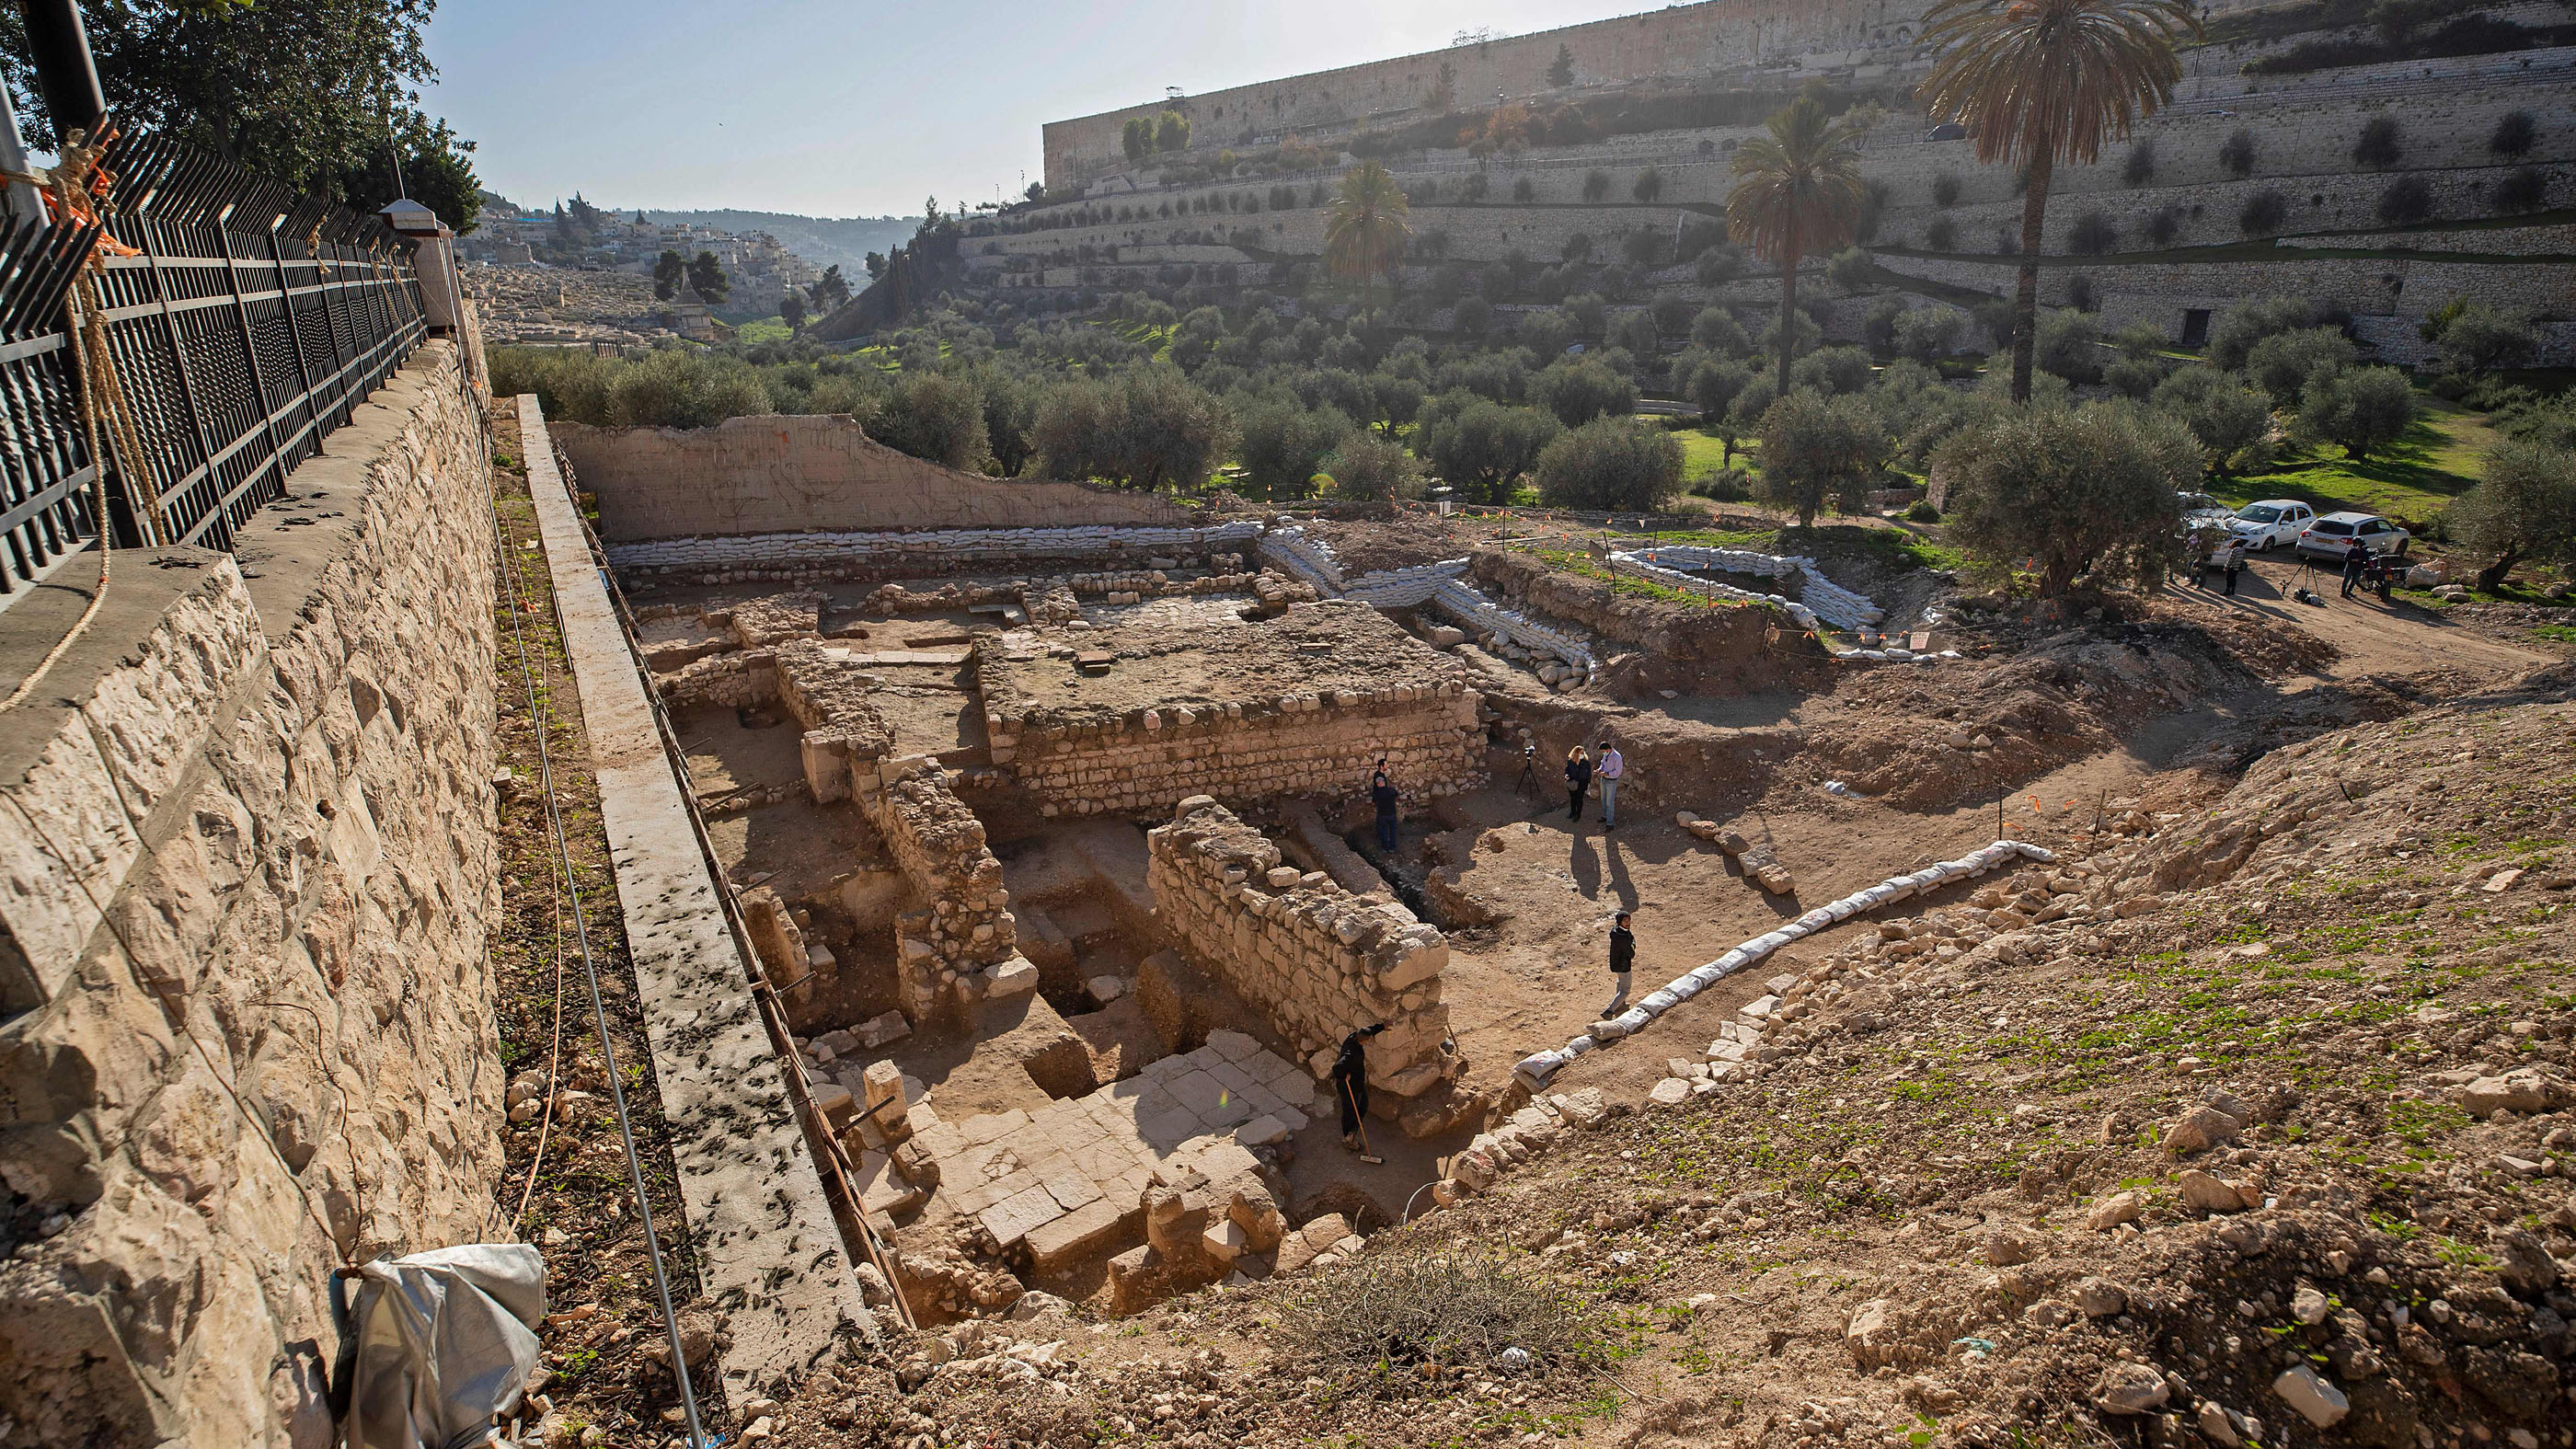 Ritual bath unearthed at site where Judas betrayed Jesus